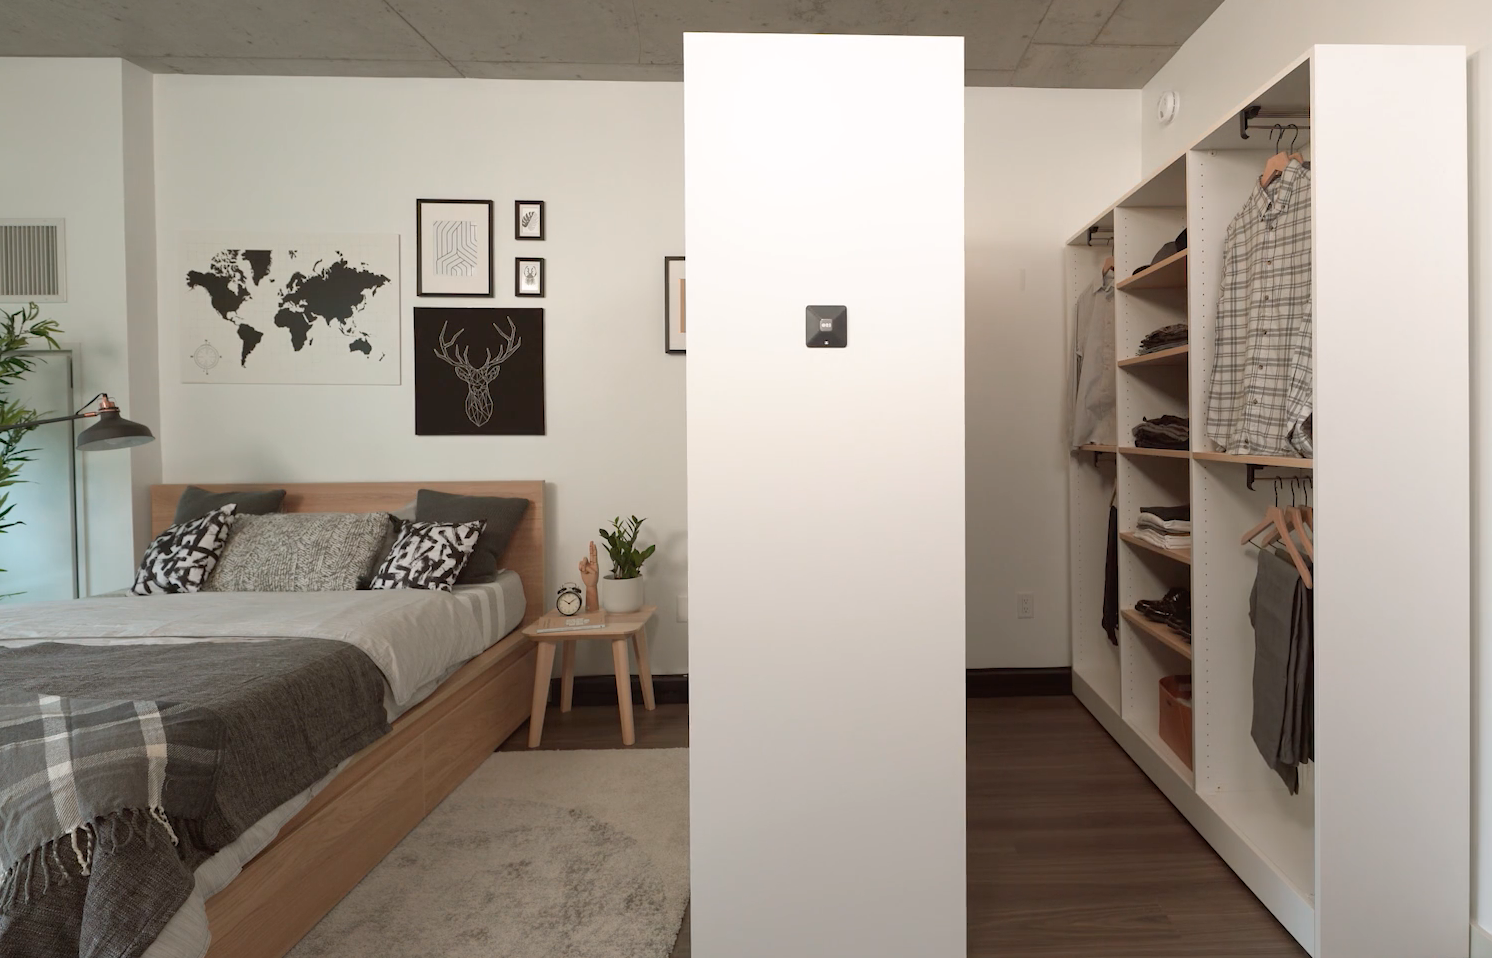 IKEA teams up with to build furniture and closet solutions | Woodworking Network